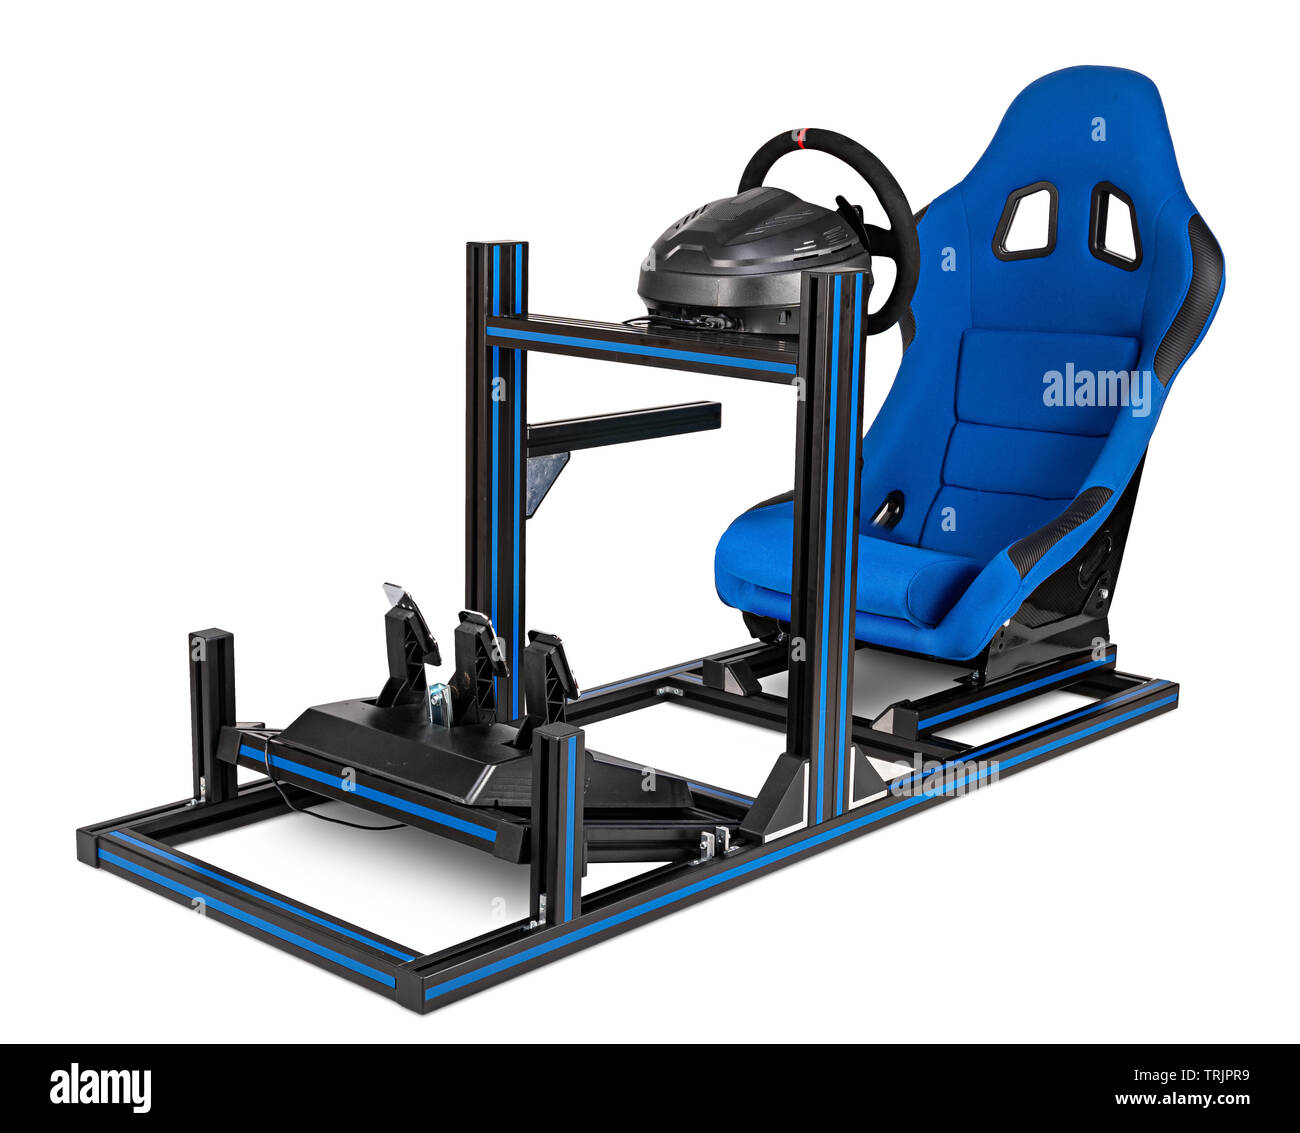 DIY simracing aluminum race simulator rig for video game racing. Blue motorsport car bucket play seat steering wheel pedals isolated on white backgrou Stock Photo